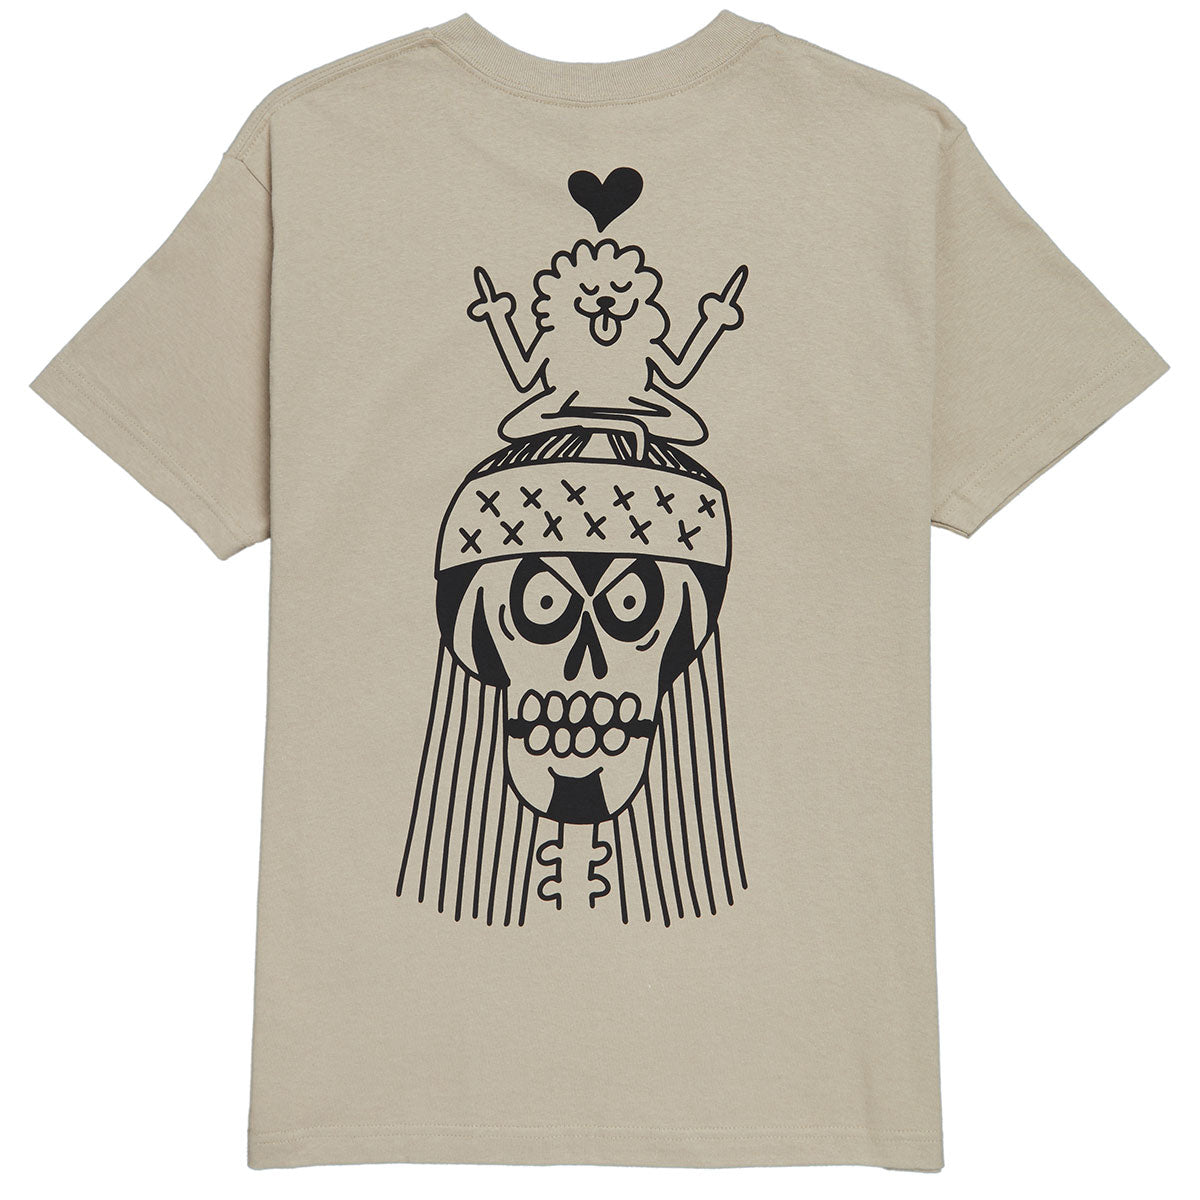 The Quiet Life x Jay Howell Doodle T-Shirt - Sand image 1